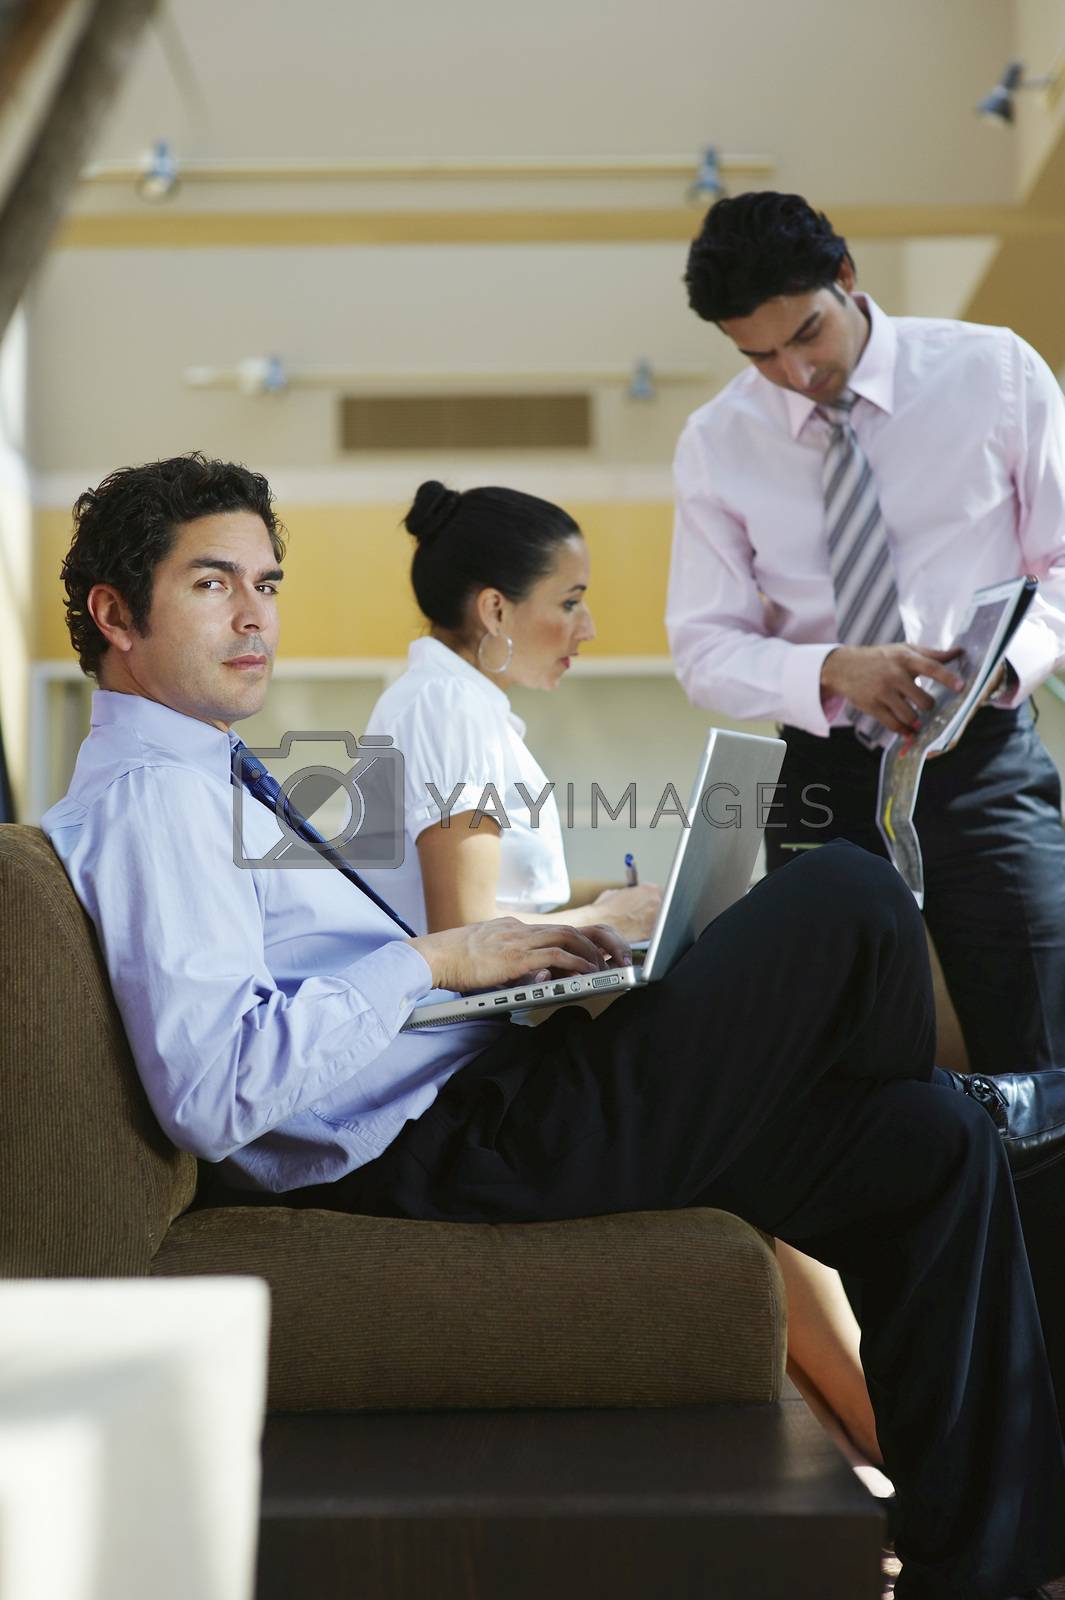 Royalty free image of Young business people working in office by moodboard